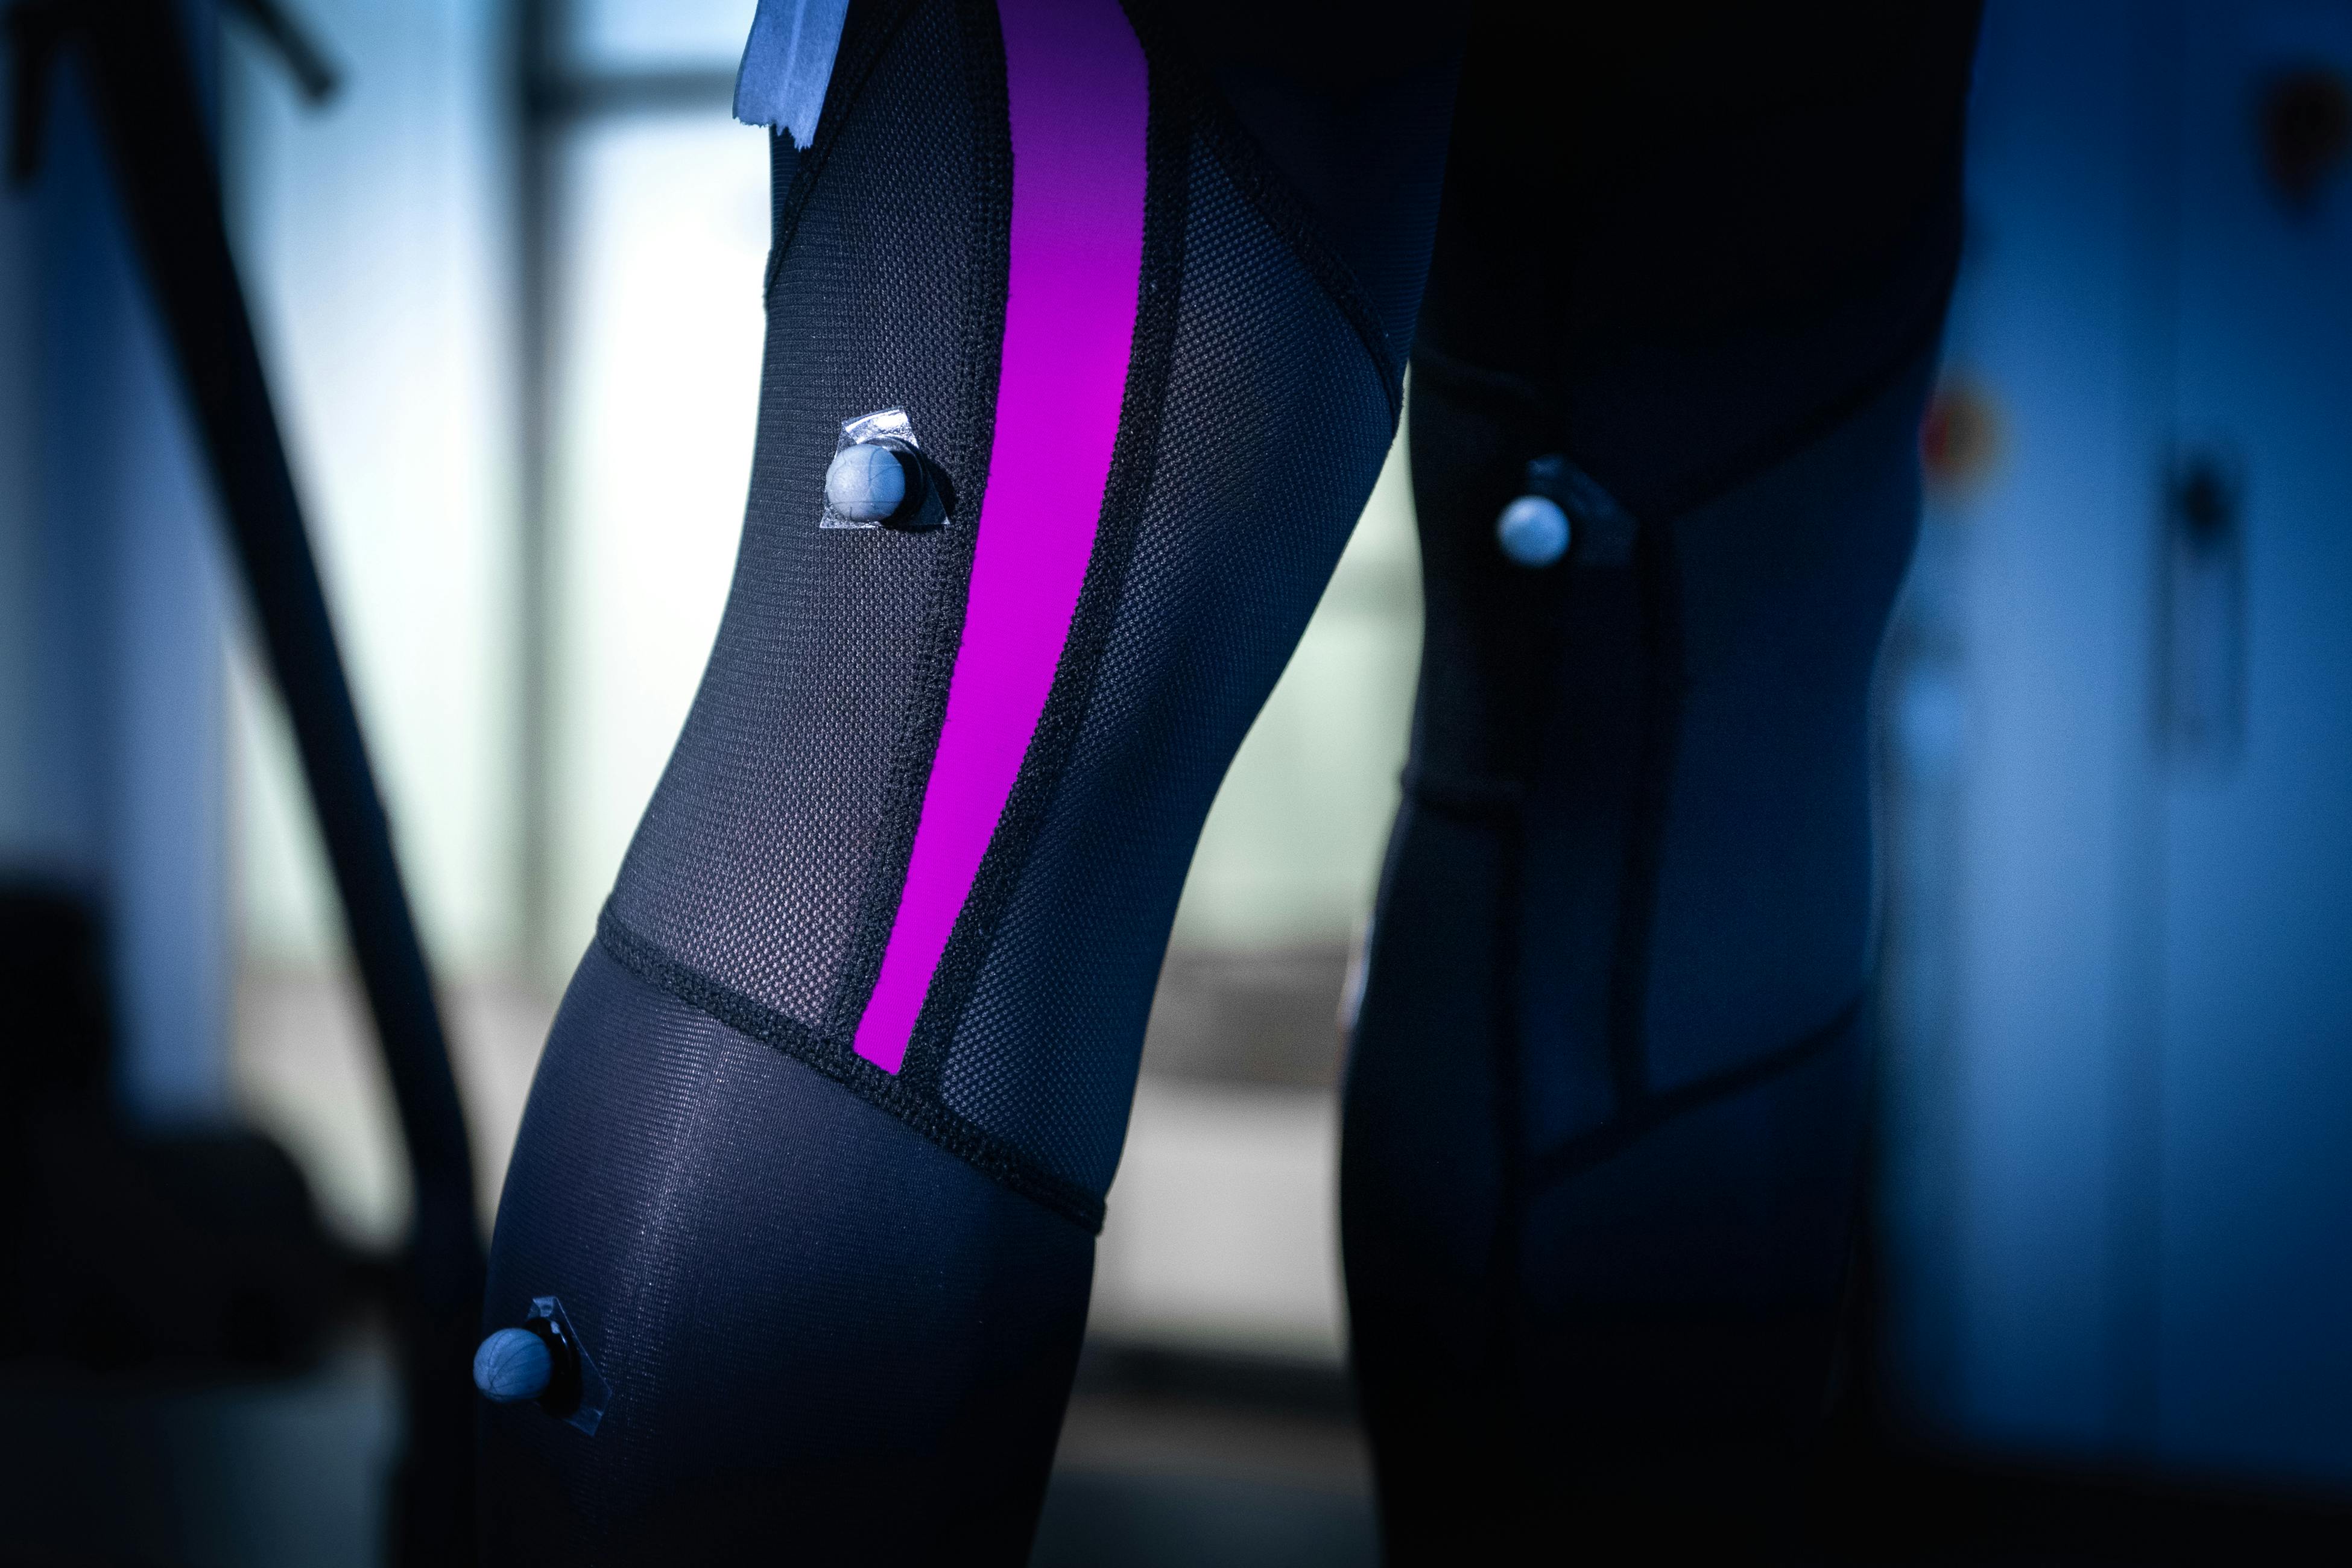 A suit with sensors at the gait analysis lab